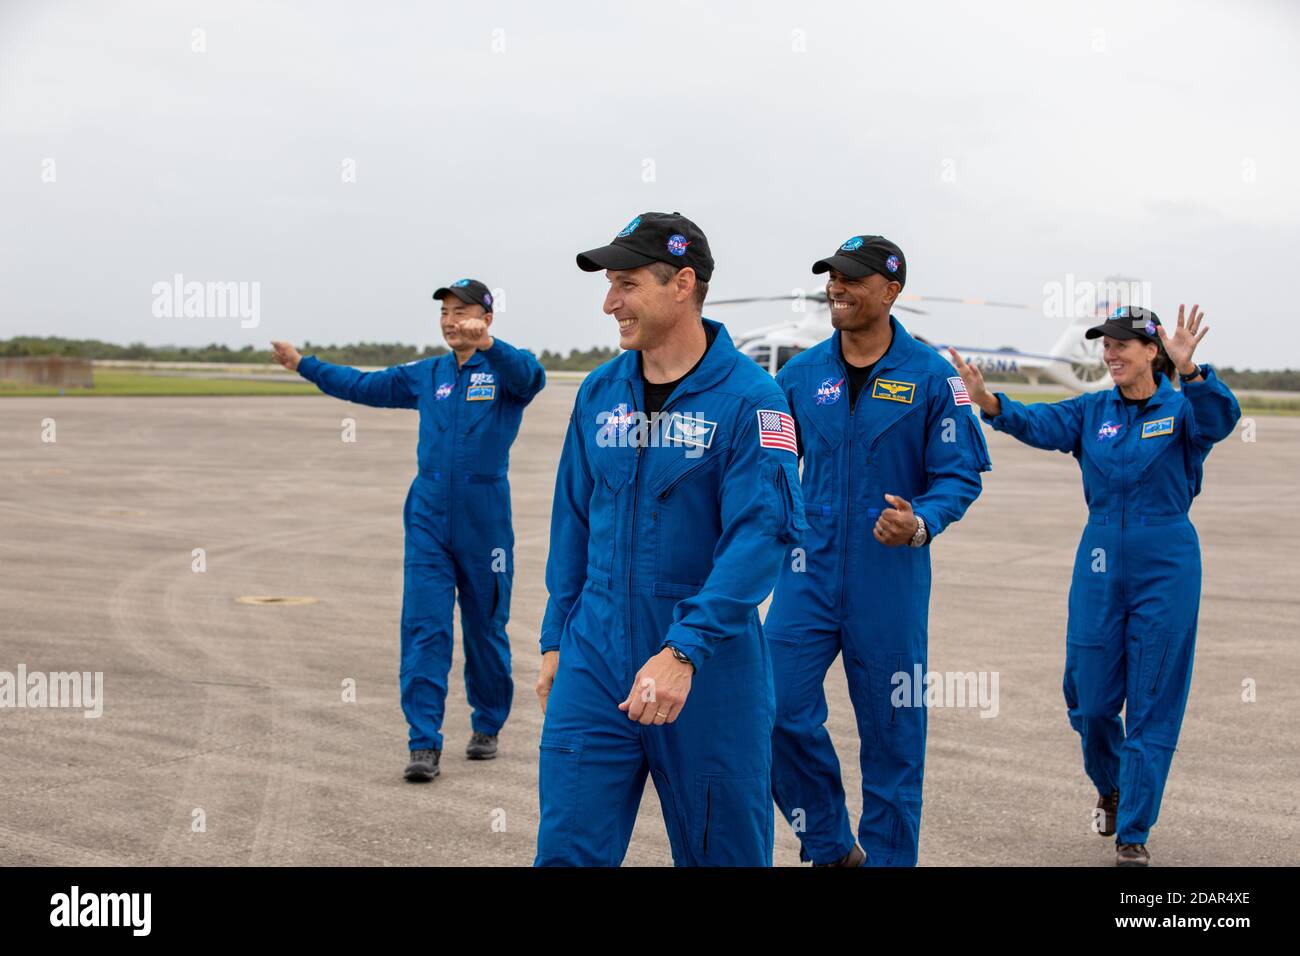 NASA astronauts wave as they arrive at the Launch and Landing Facility for the Commercial Crew One mission at the Kennedy Space Center November 8, 2020 in Cape Canaveral, Florida. Standing from left to right are: JAXA astronaut Soichi Noguchi, NASA astronaut Mike Hopkins, Victor Glover and Shannon Walker. Stock Photo